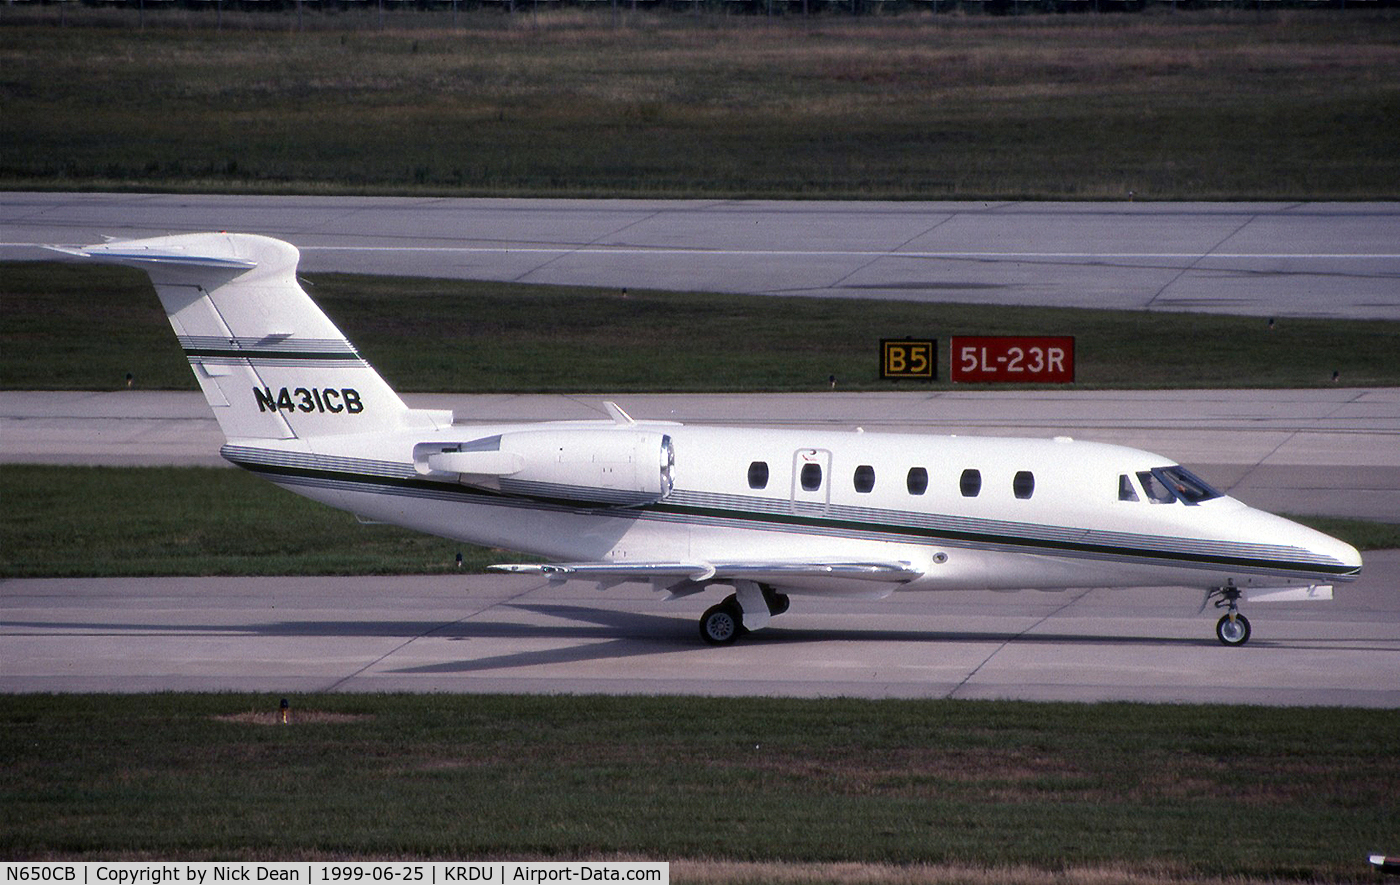 N650CB, 1985 Cessna 650 Citation III C/N 650-0084, KRDU (Seen here as N431CB this airframe is currently registered N650CB as posted)